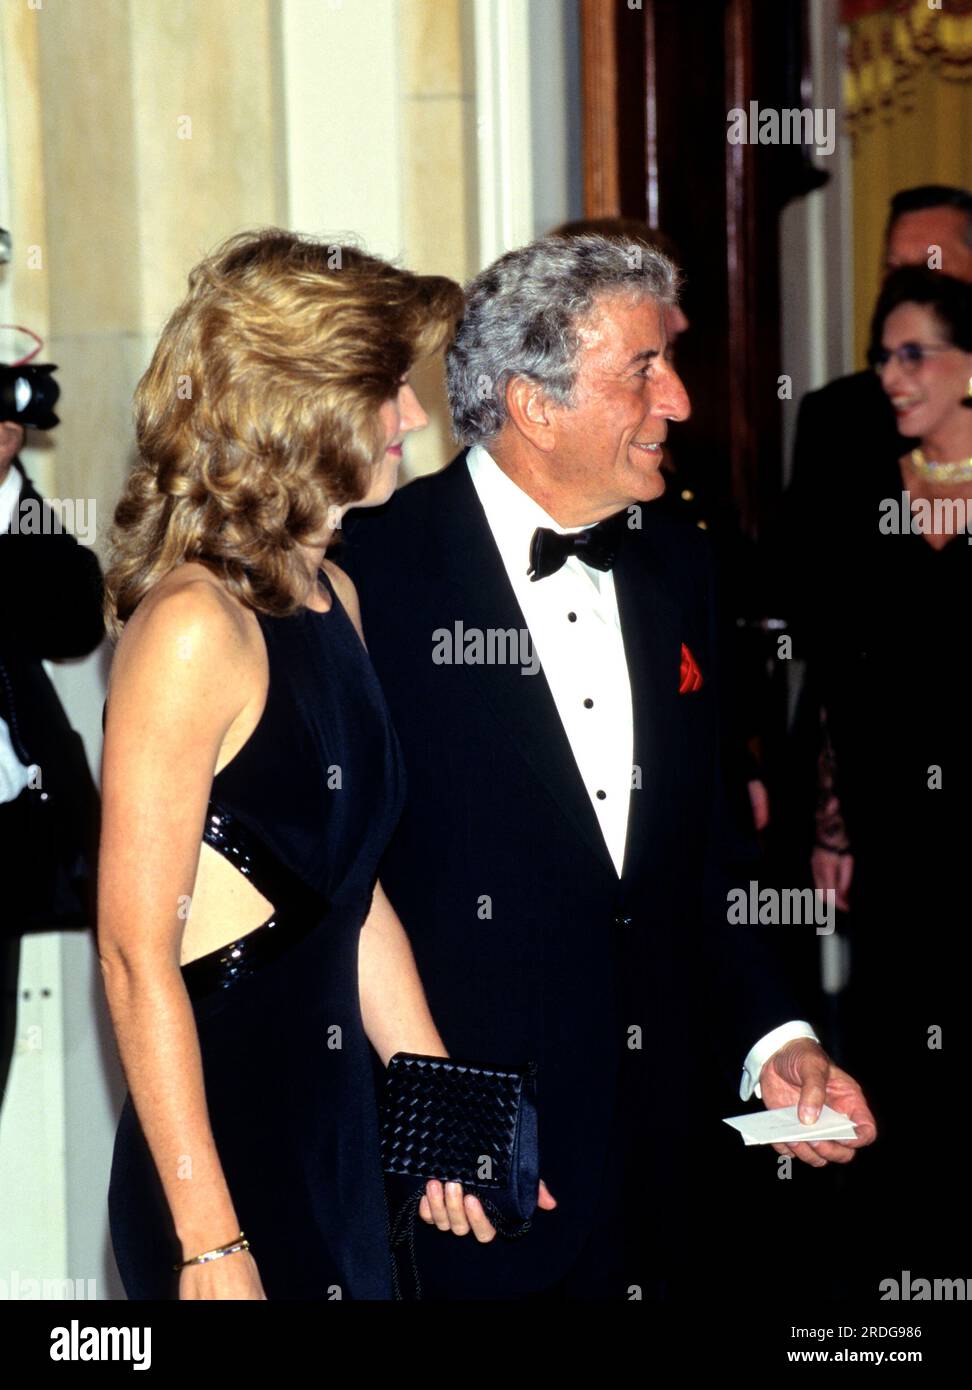 Singer Tony Bennett waits to be introduced to United States President Bill Clinton and first lady Hillary Rodham Clinton at the Official Dinner honoring Chancellor Helmut Kohl of Germany at the White House in Washington, DC for an Official Dinner on Thursday, February 9, 1995. Credit: John Harrington / Pool via CNP Stock Photo